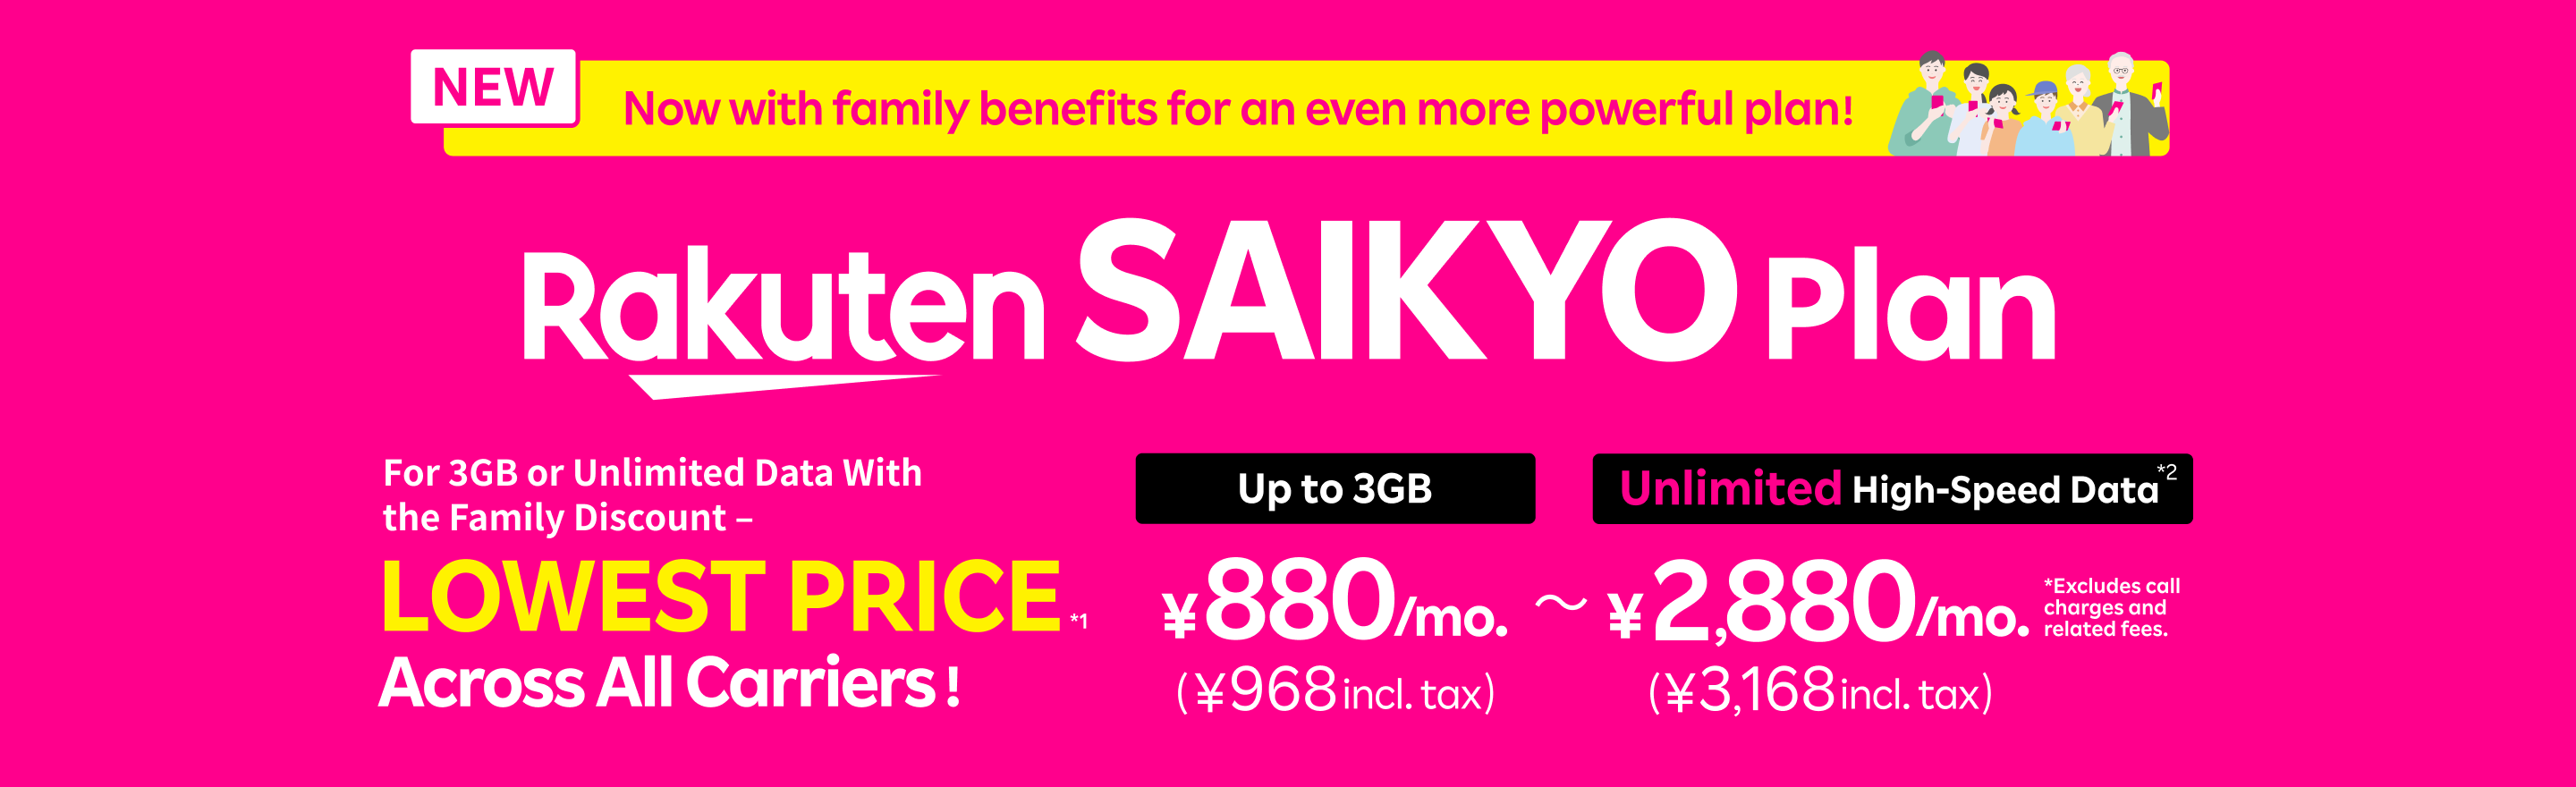 Now with added family benefits, making SAIKYO Plan even more powerful! Best deal for 3GB or unlimited data with the family discount – LOWEST PRICE across all carriers! 880 yen/mo. (968 yen incl. tax) up to 3GB, 2,880 yen/mo. (3,168 yen incl. tax) for unlimited high-speed data!